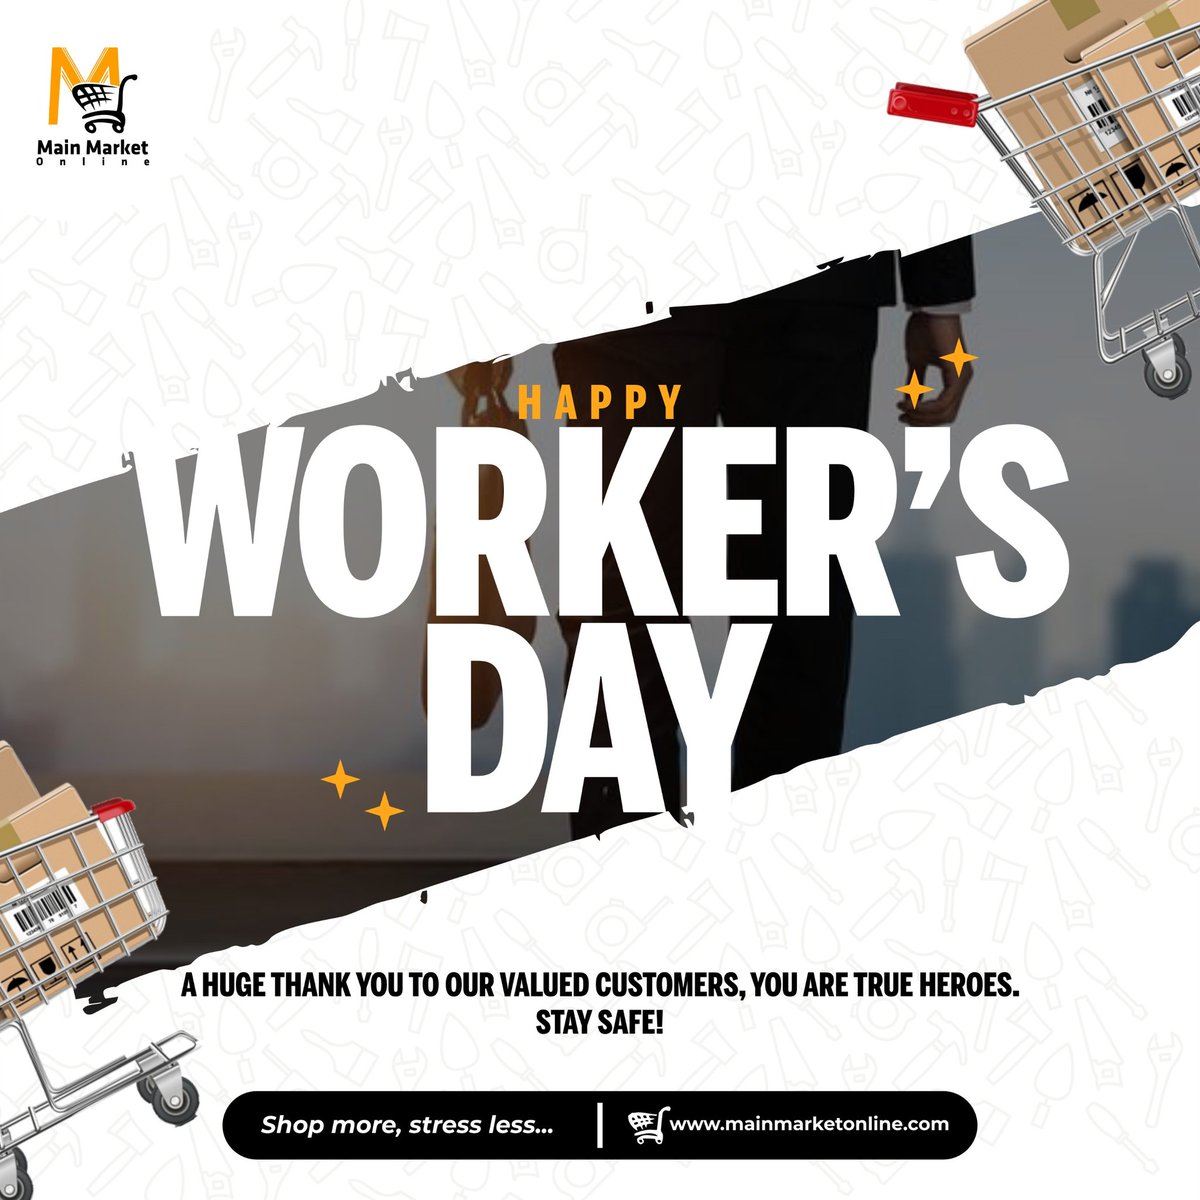 Happy New Month! Wishing you greatness, love, and abundant blessings in May! And to all the hardworking souls out there, Happy Workers' Day! Your dedication inspires us every day. 🎉💼 #HappyNewMonth #MayDay #WorkersDay #CelebrateYou #MMO #MainMarketOnline